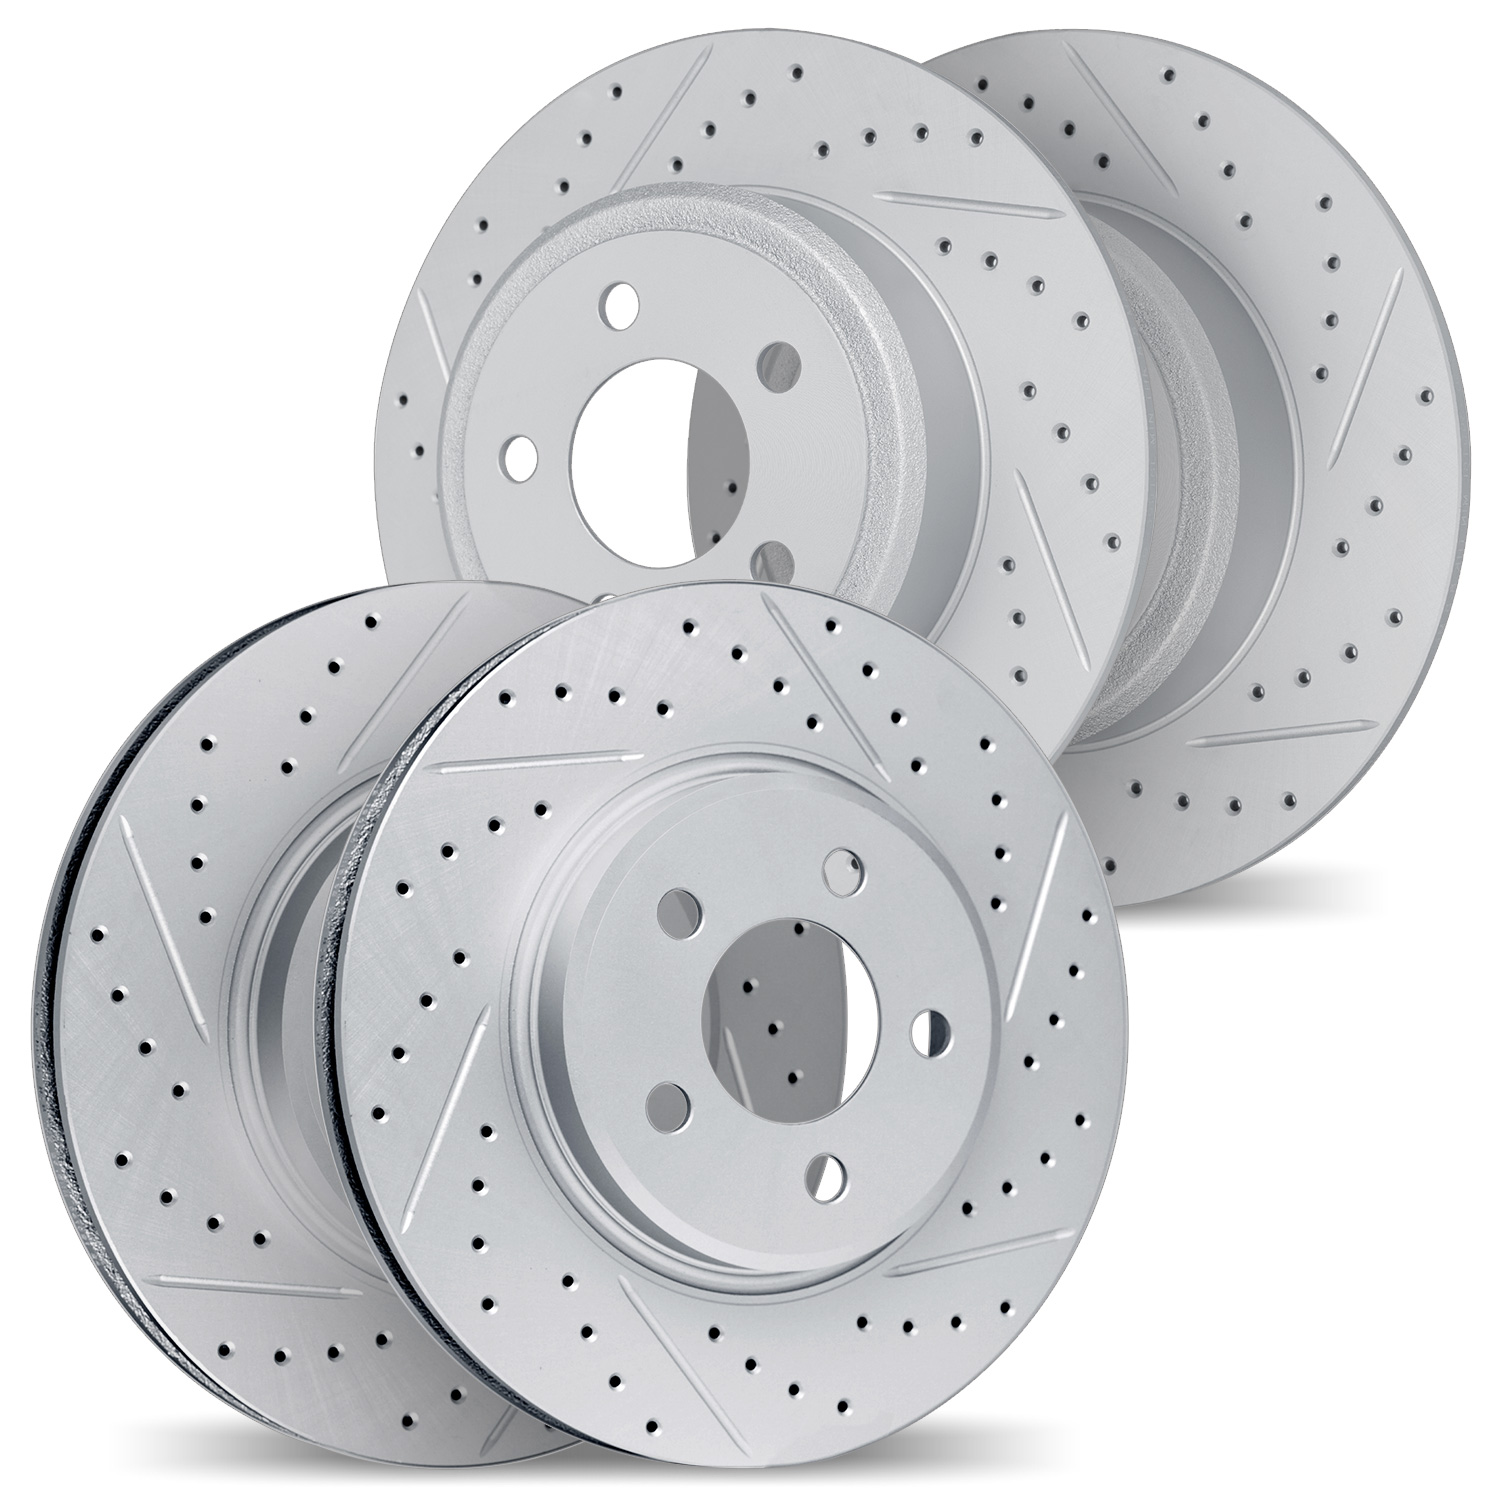 2004-40007 Geoperformance Drilled/Slotted Brake Rotors, 1999-2004 Mopar, Position: Front and Rear